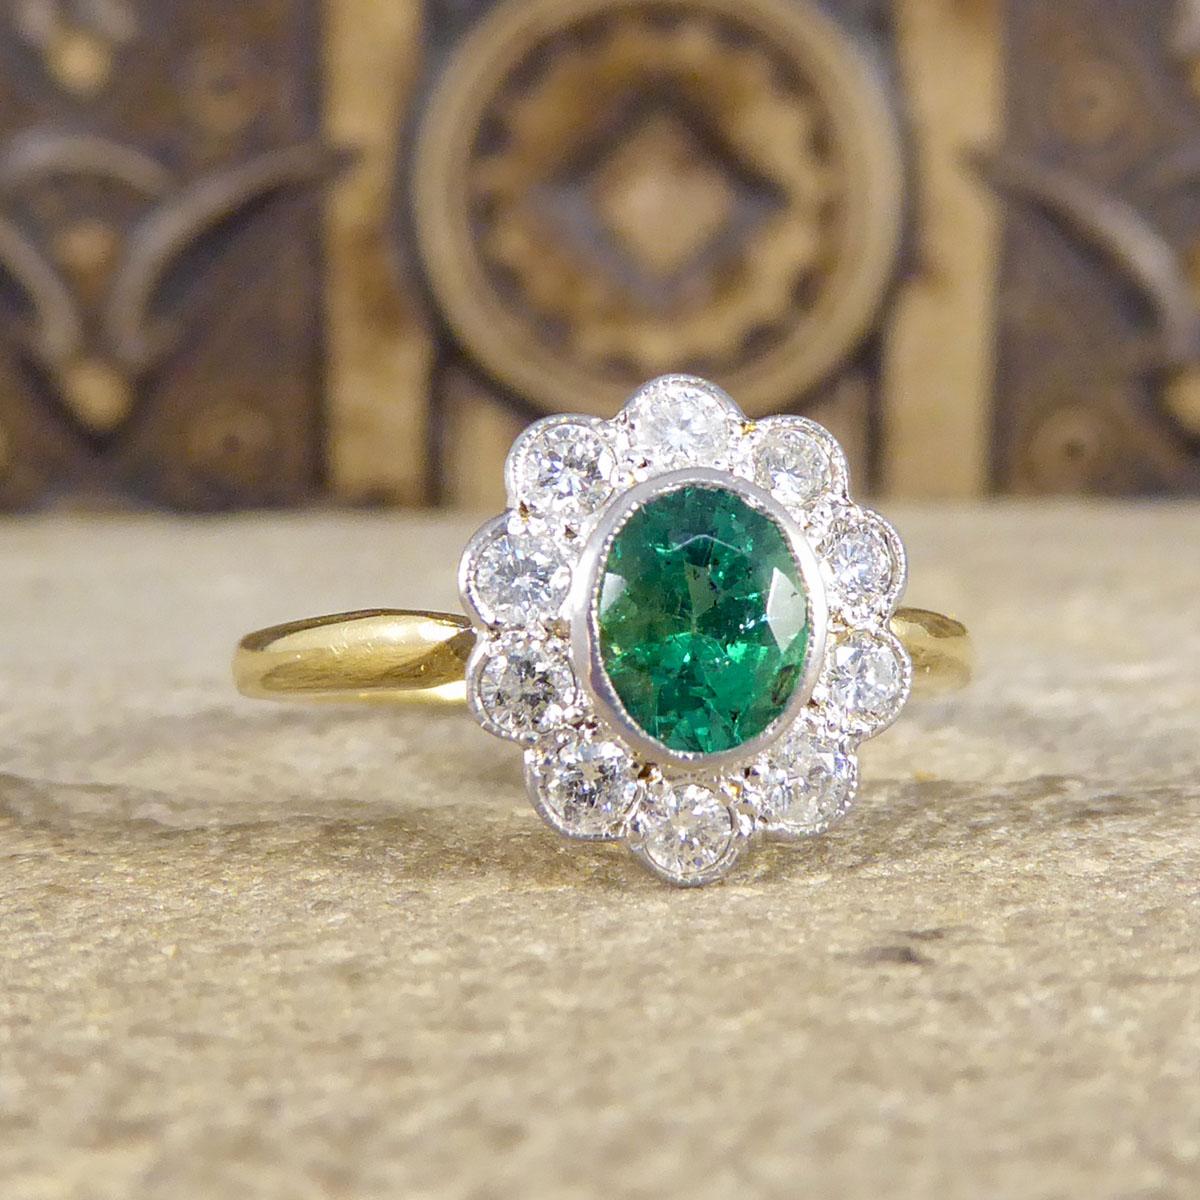 This gorgeous ring holds a mesmerising Oval Cut Emerald weighing 0.60ct with normal Emerald inclusions, surrounded by 0.35ct of brilliant cut Diamonds adding sparkle to an already glistening piece. All the stones are set in an 18ct White Gold rub